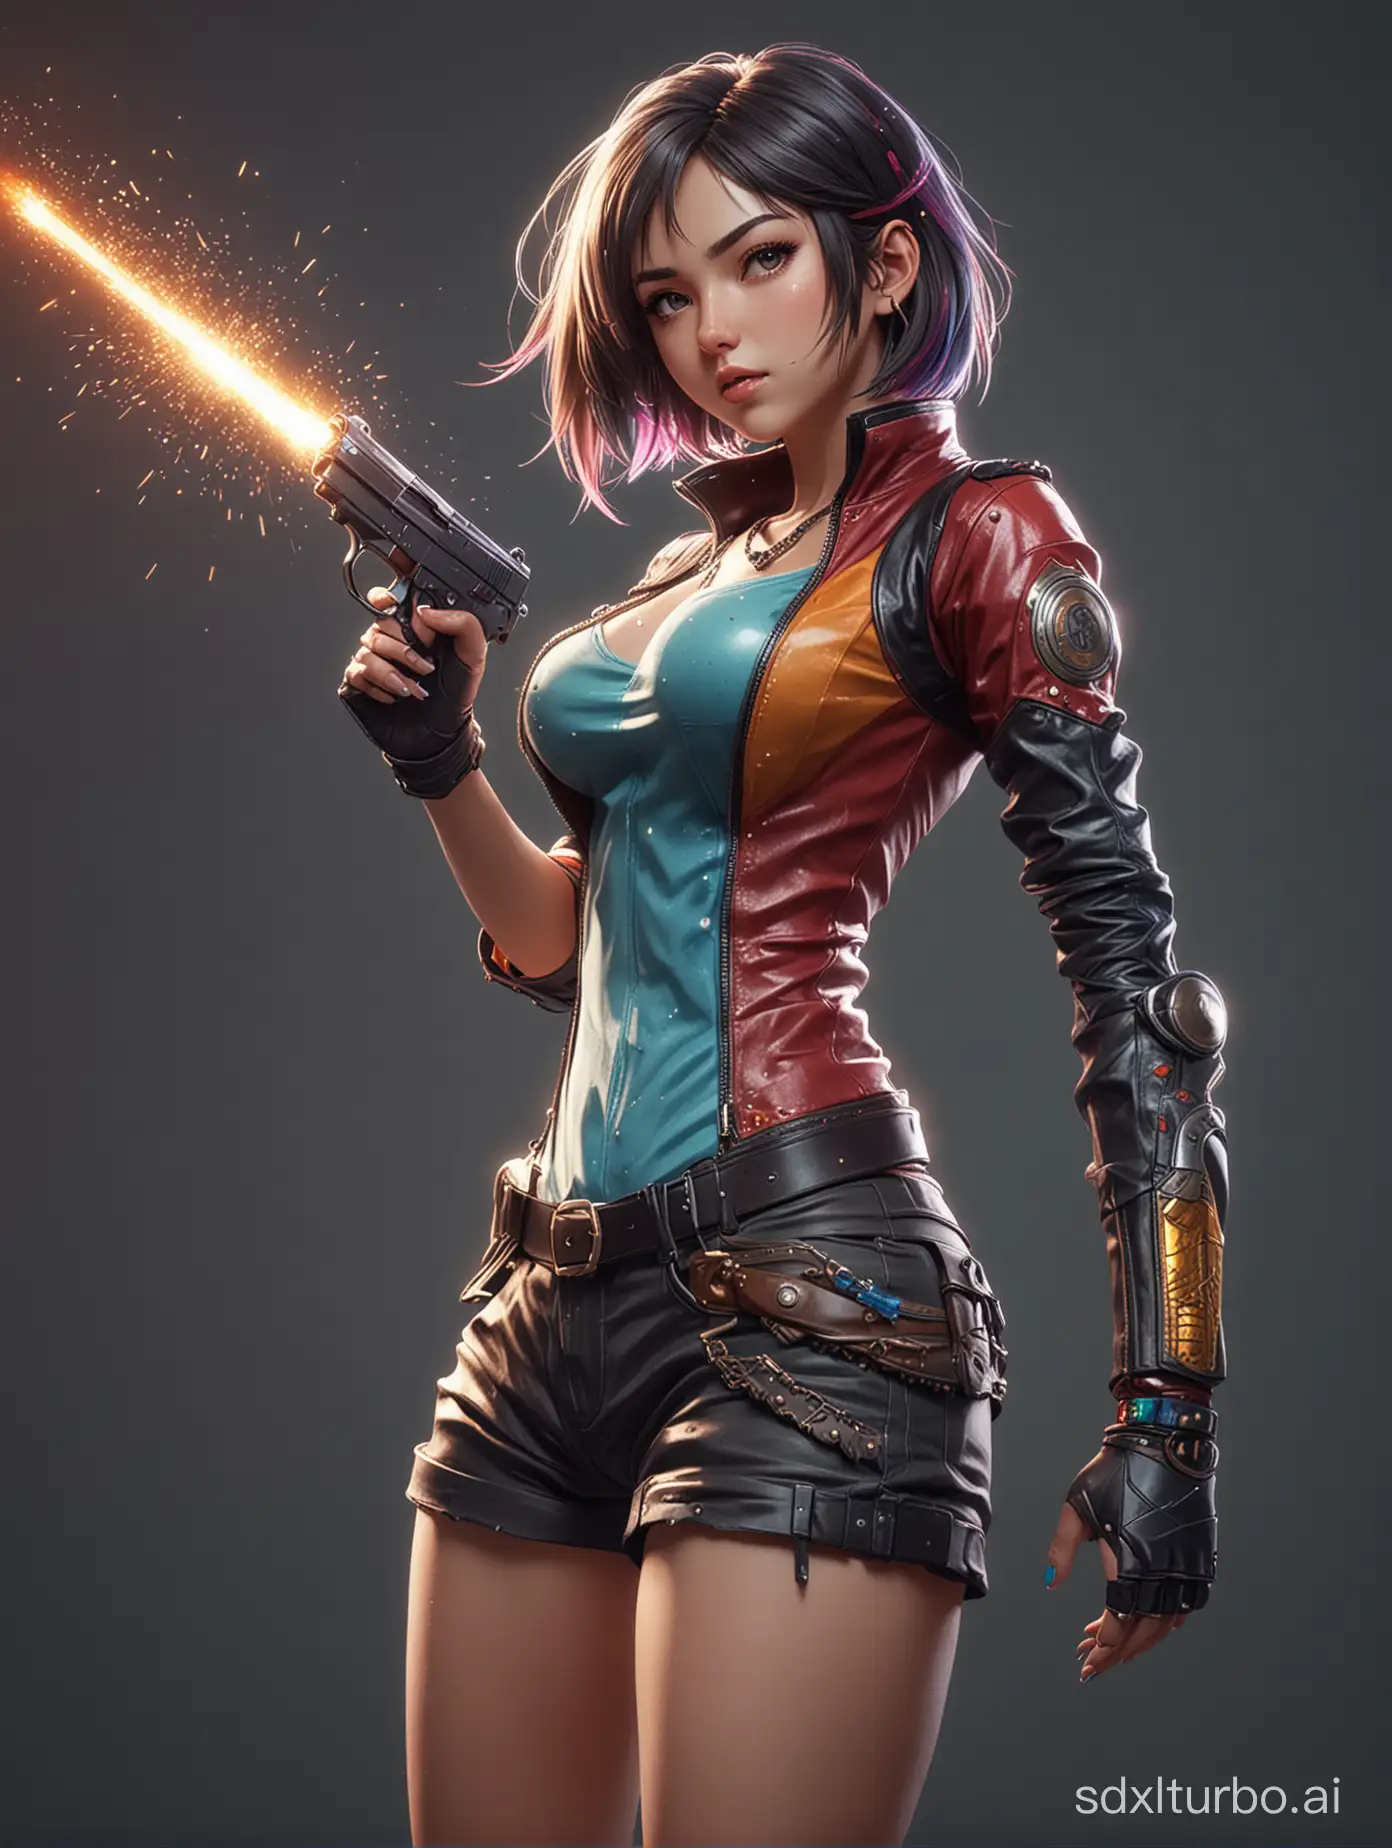 rendered anime girl shooting a bullet, full body, Mysterious, Cholo, Futurism, side view, CGsociety, Contrasty, Mosaic, multicoloured colors, Dreamy, halfrear lighting, Highly detailed